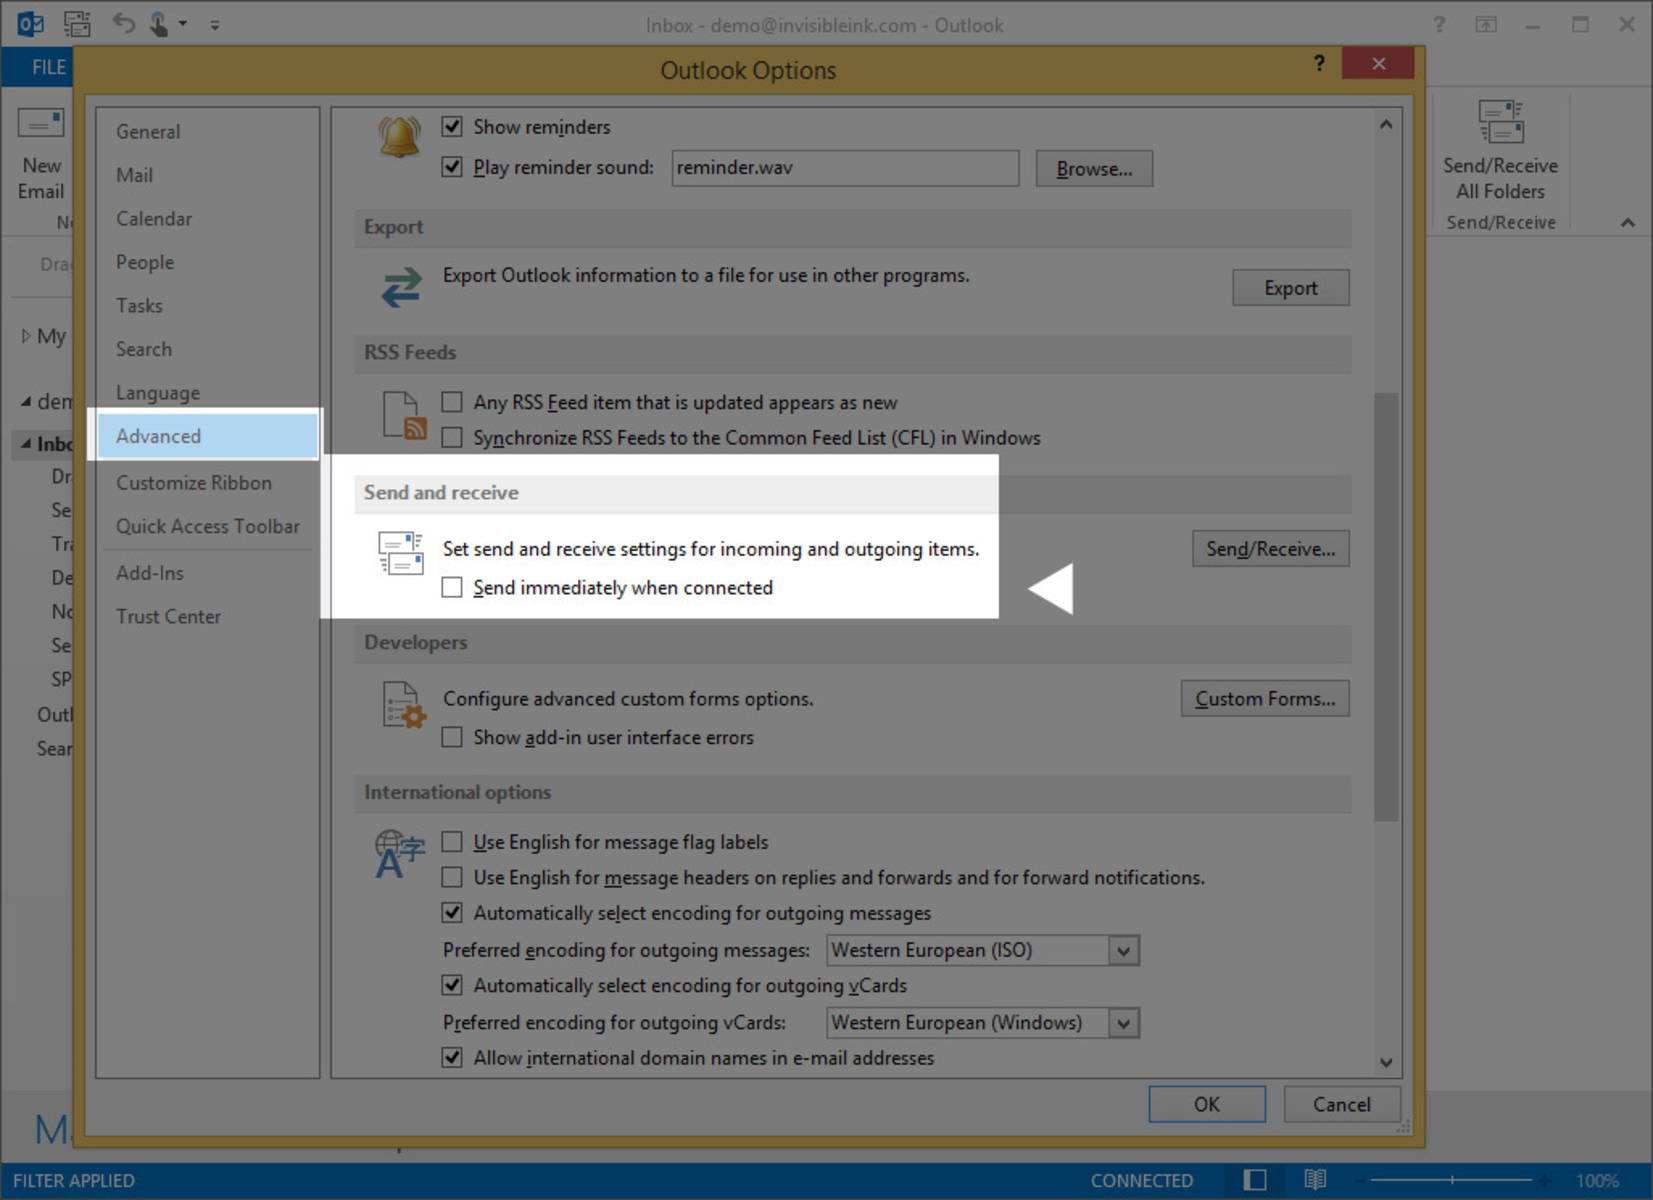 Step 2 » Select Advanced from the left-hand side of the Outlook Options window, then Scroll to the Send & Receive heading. Un-check the box labeled "Send immediately when connected". Click OK to close the Outlook Options window.